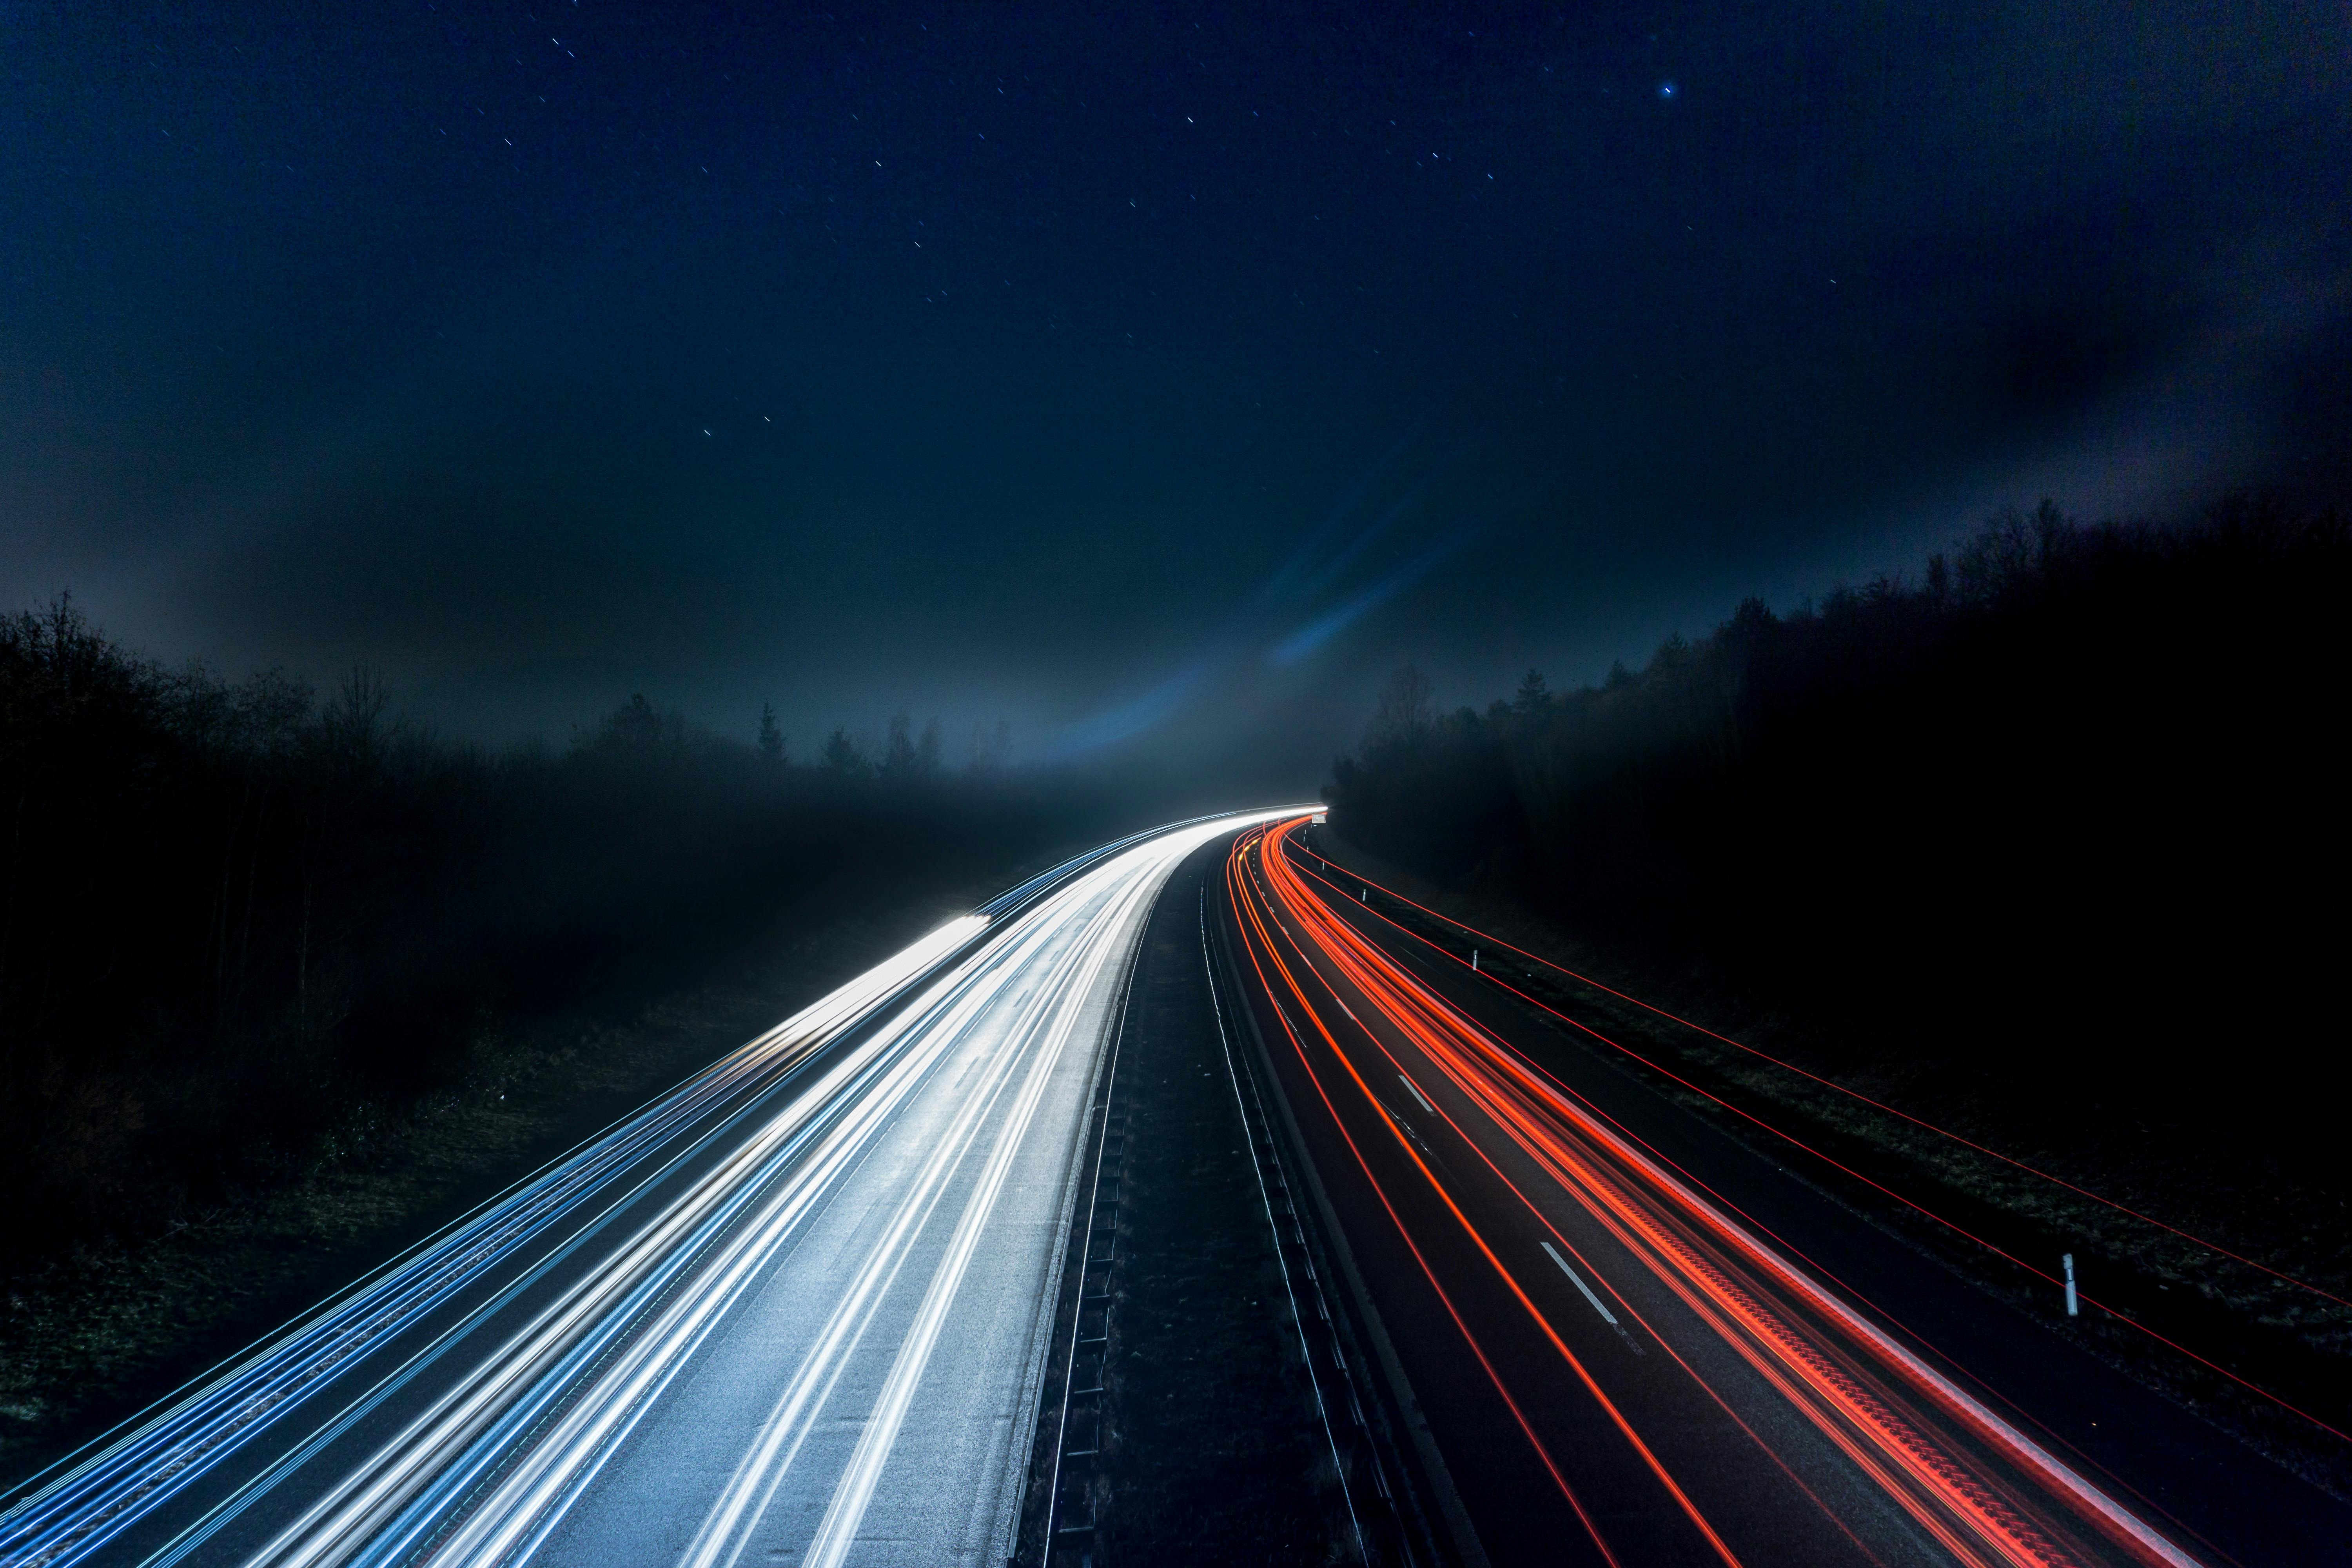 Lead photo: Light trails on highway at night - Photo by Pixabay: https://www.pexels.com/photo/light-trails-on-highway-at-night-315938/